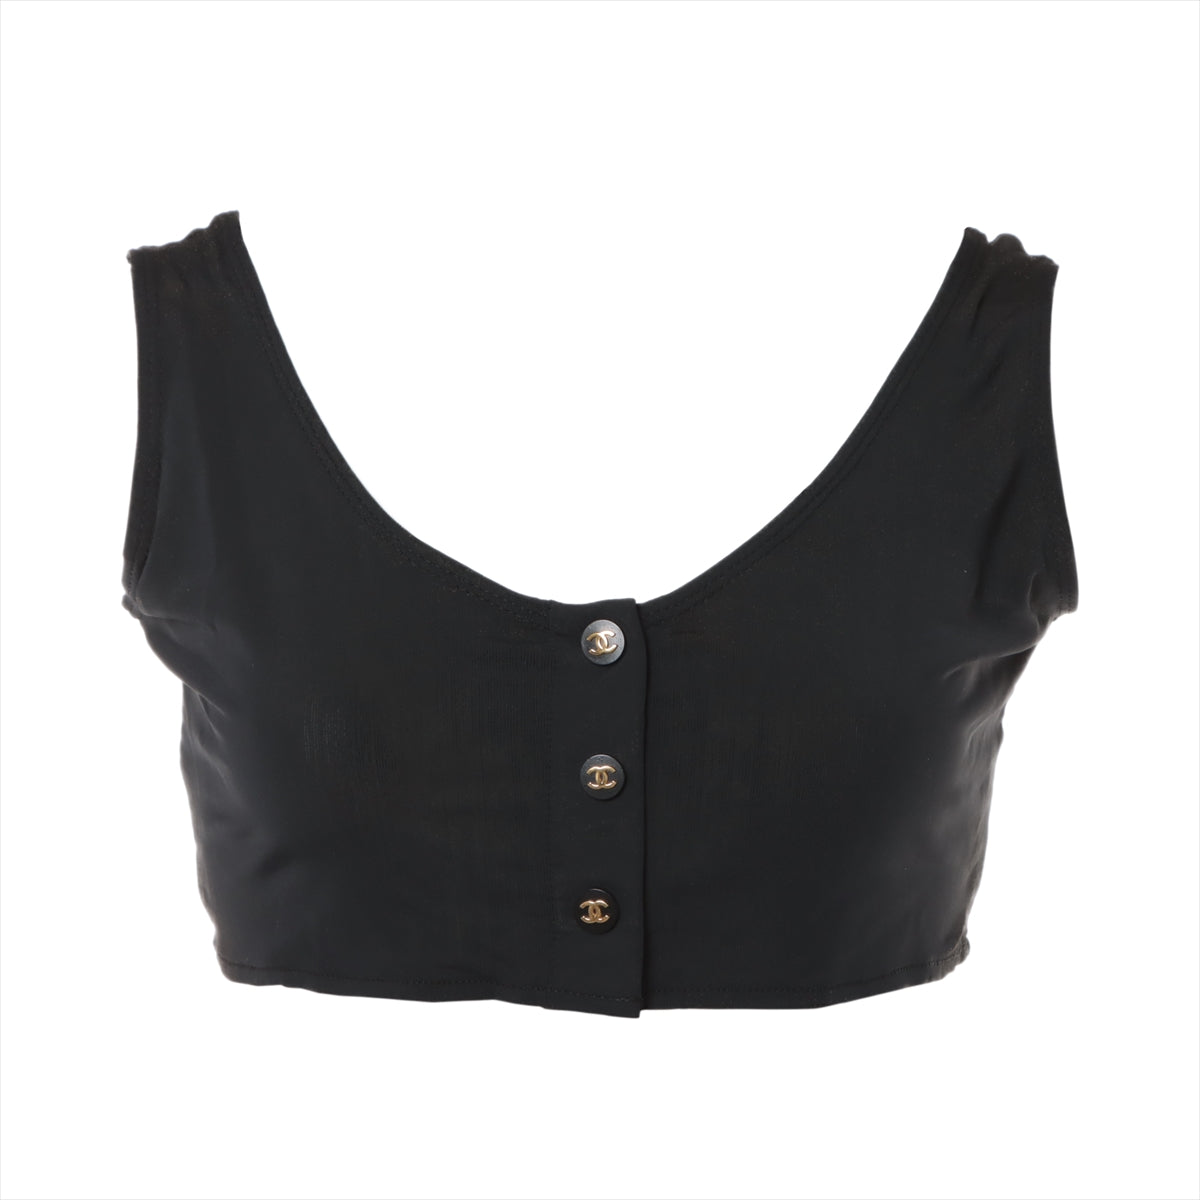 Chanel Coco Button Unknown material Tank top 40 Ladies' Black  cropped